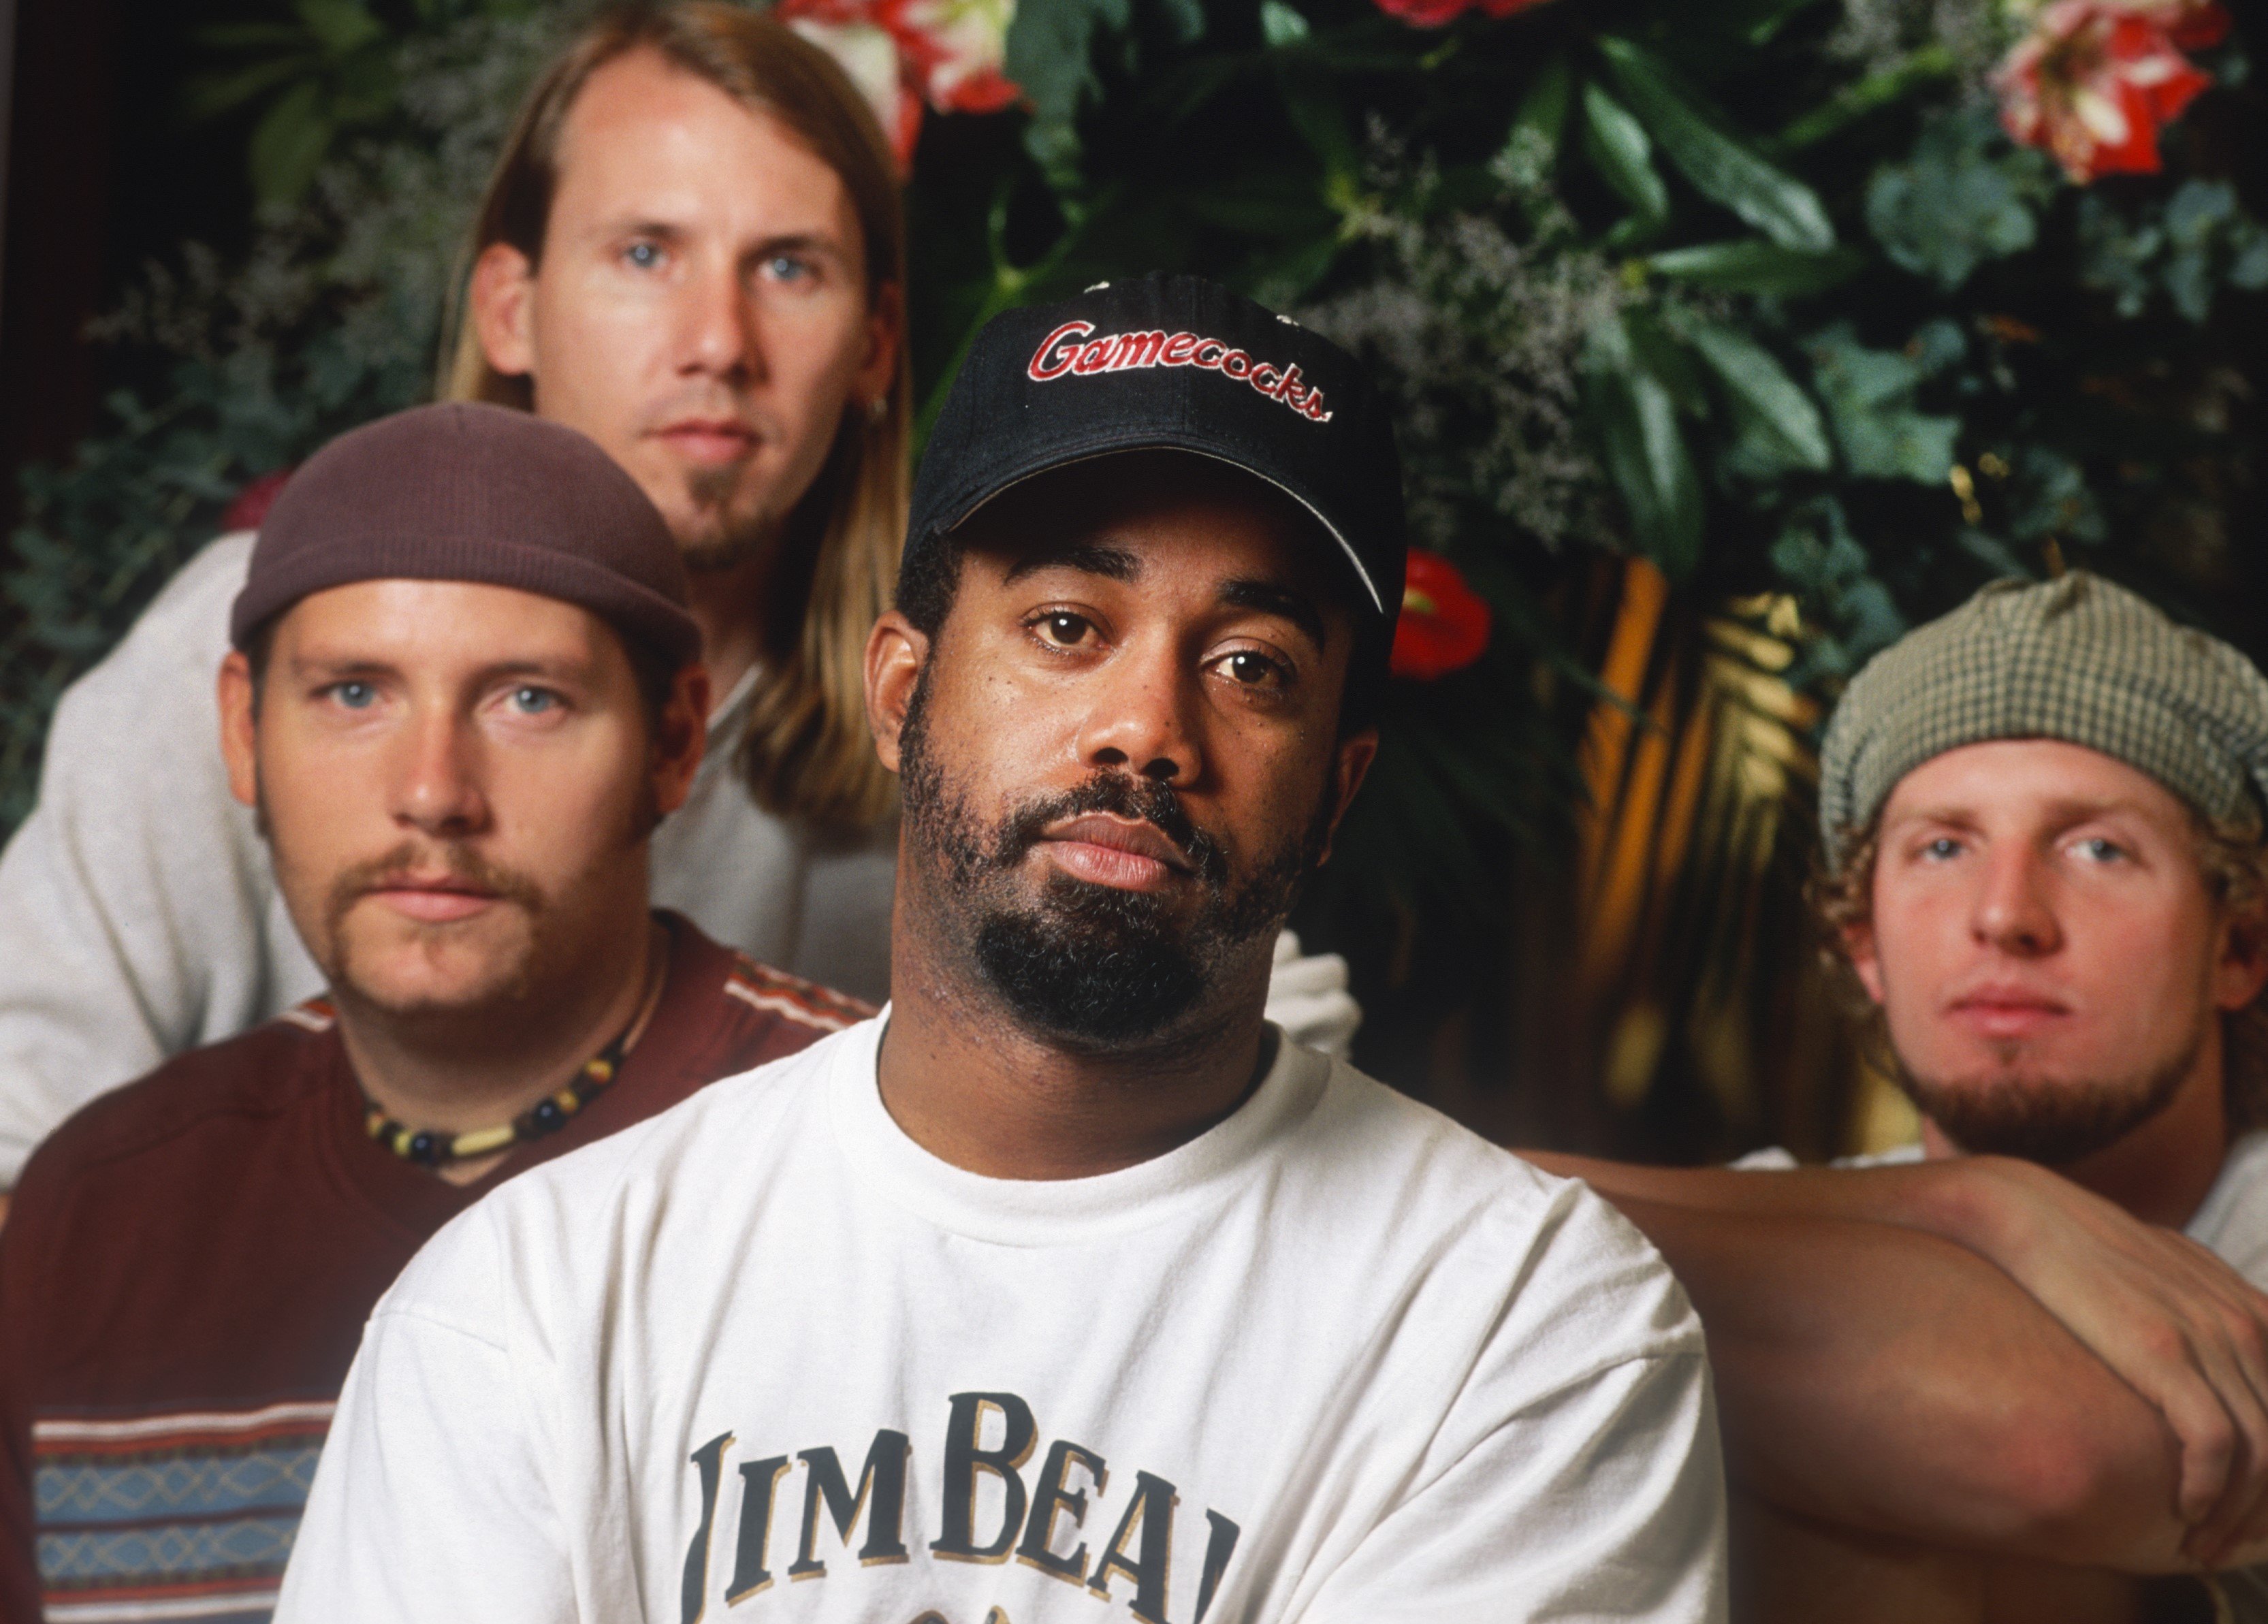 Hootie & the Blowfish by a plant during the "Only Wanna Be with You" era